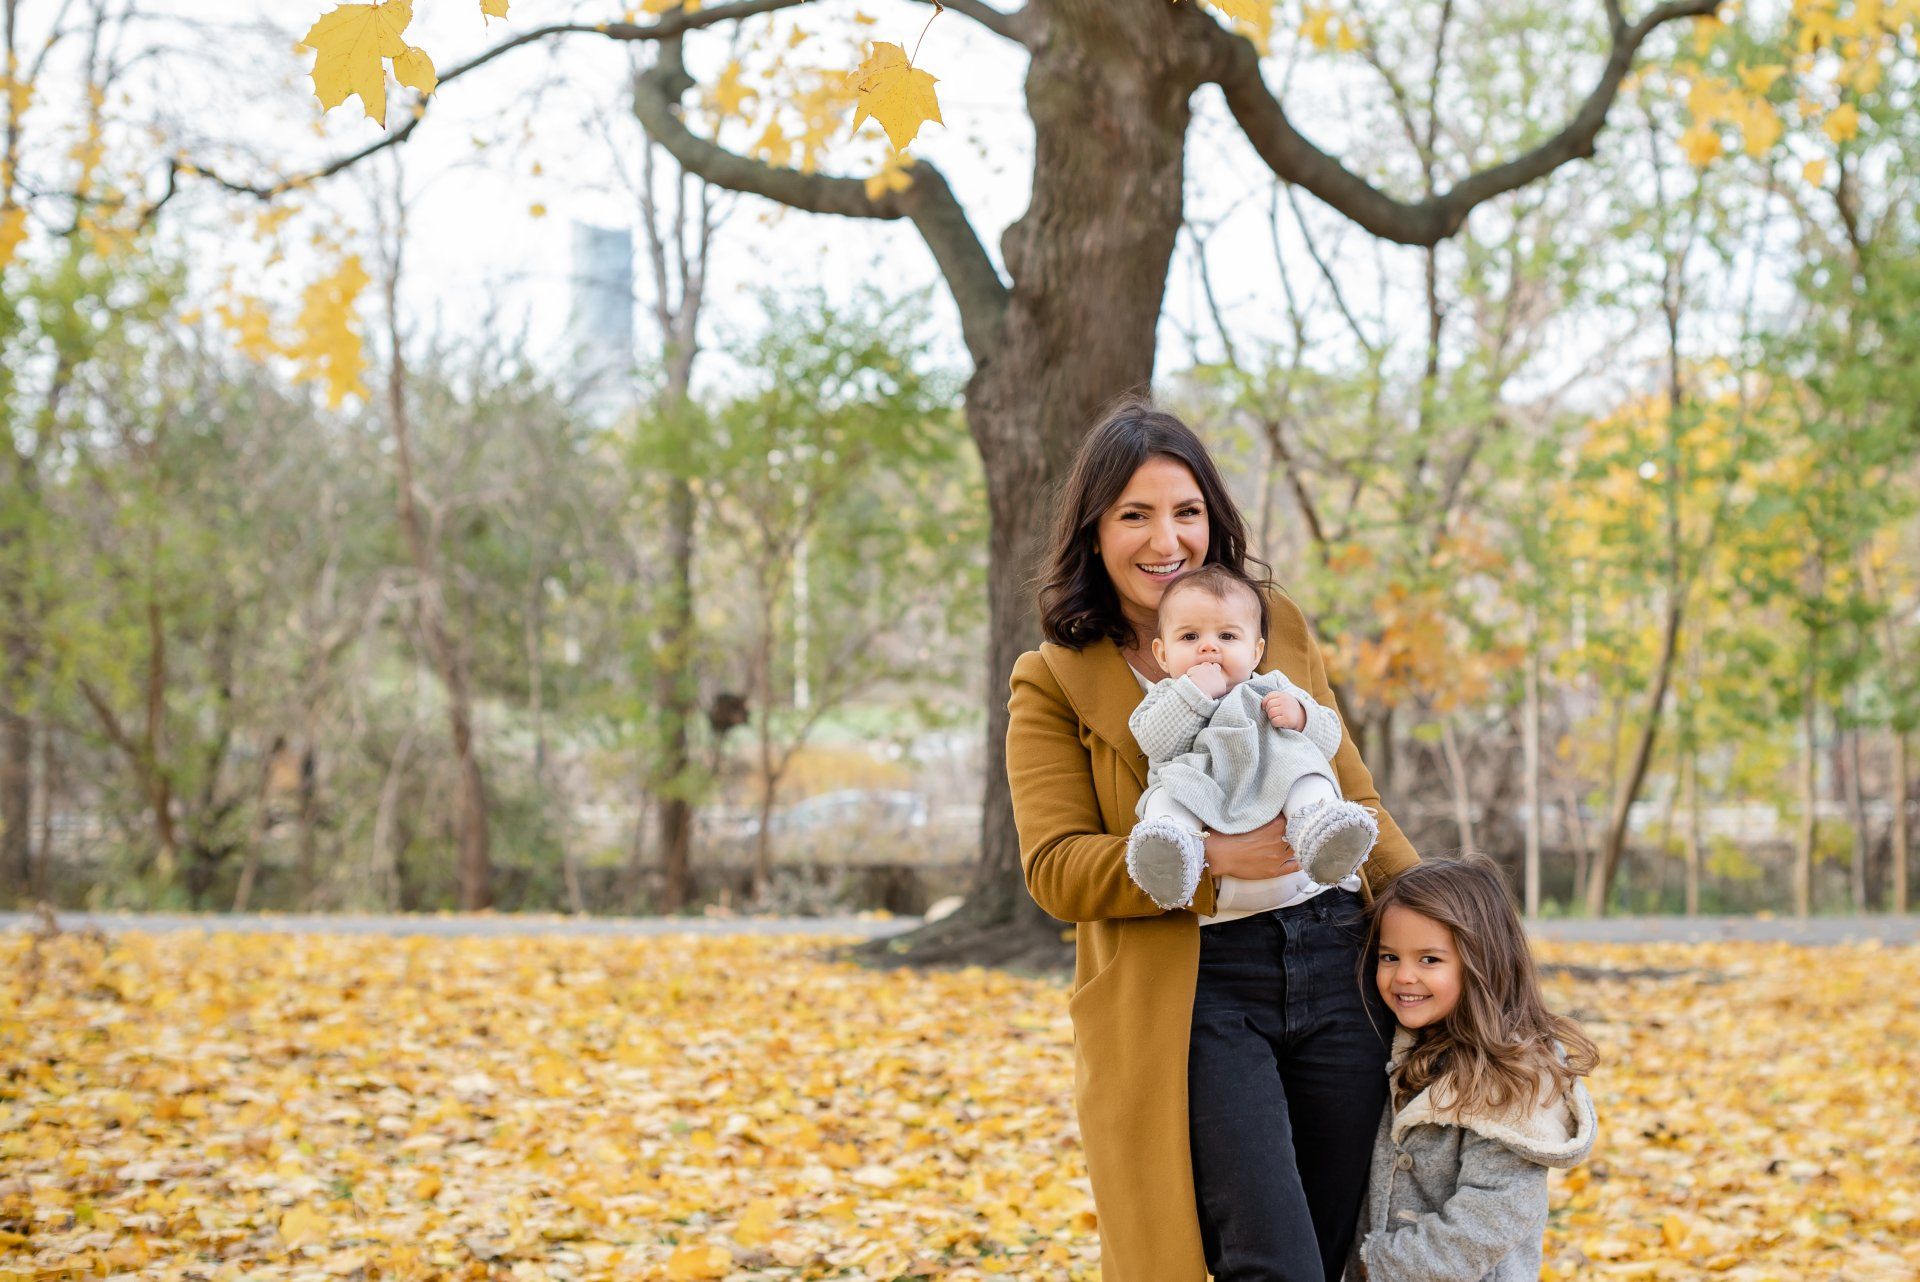 Family photographer Toronto | Stacey Naglie | Standing woman holding baby with young girl